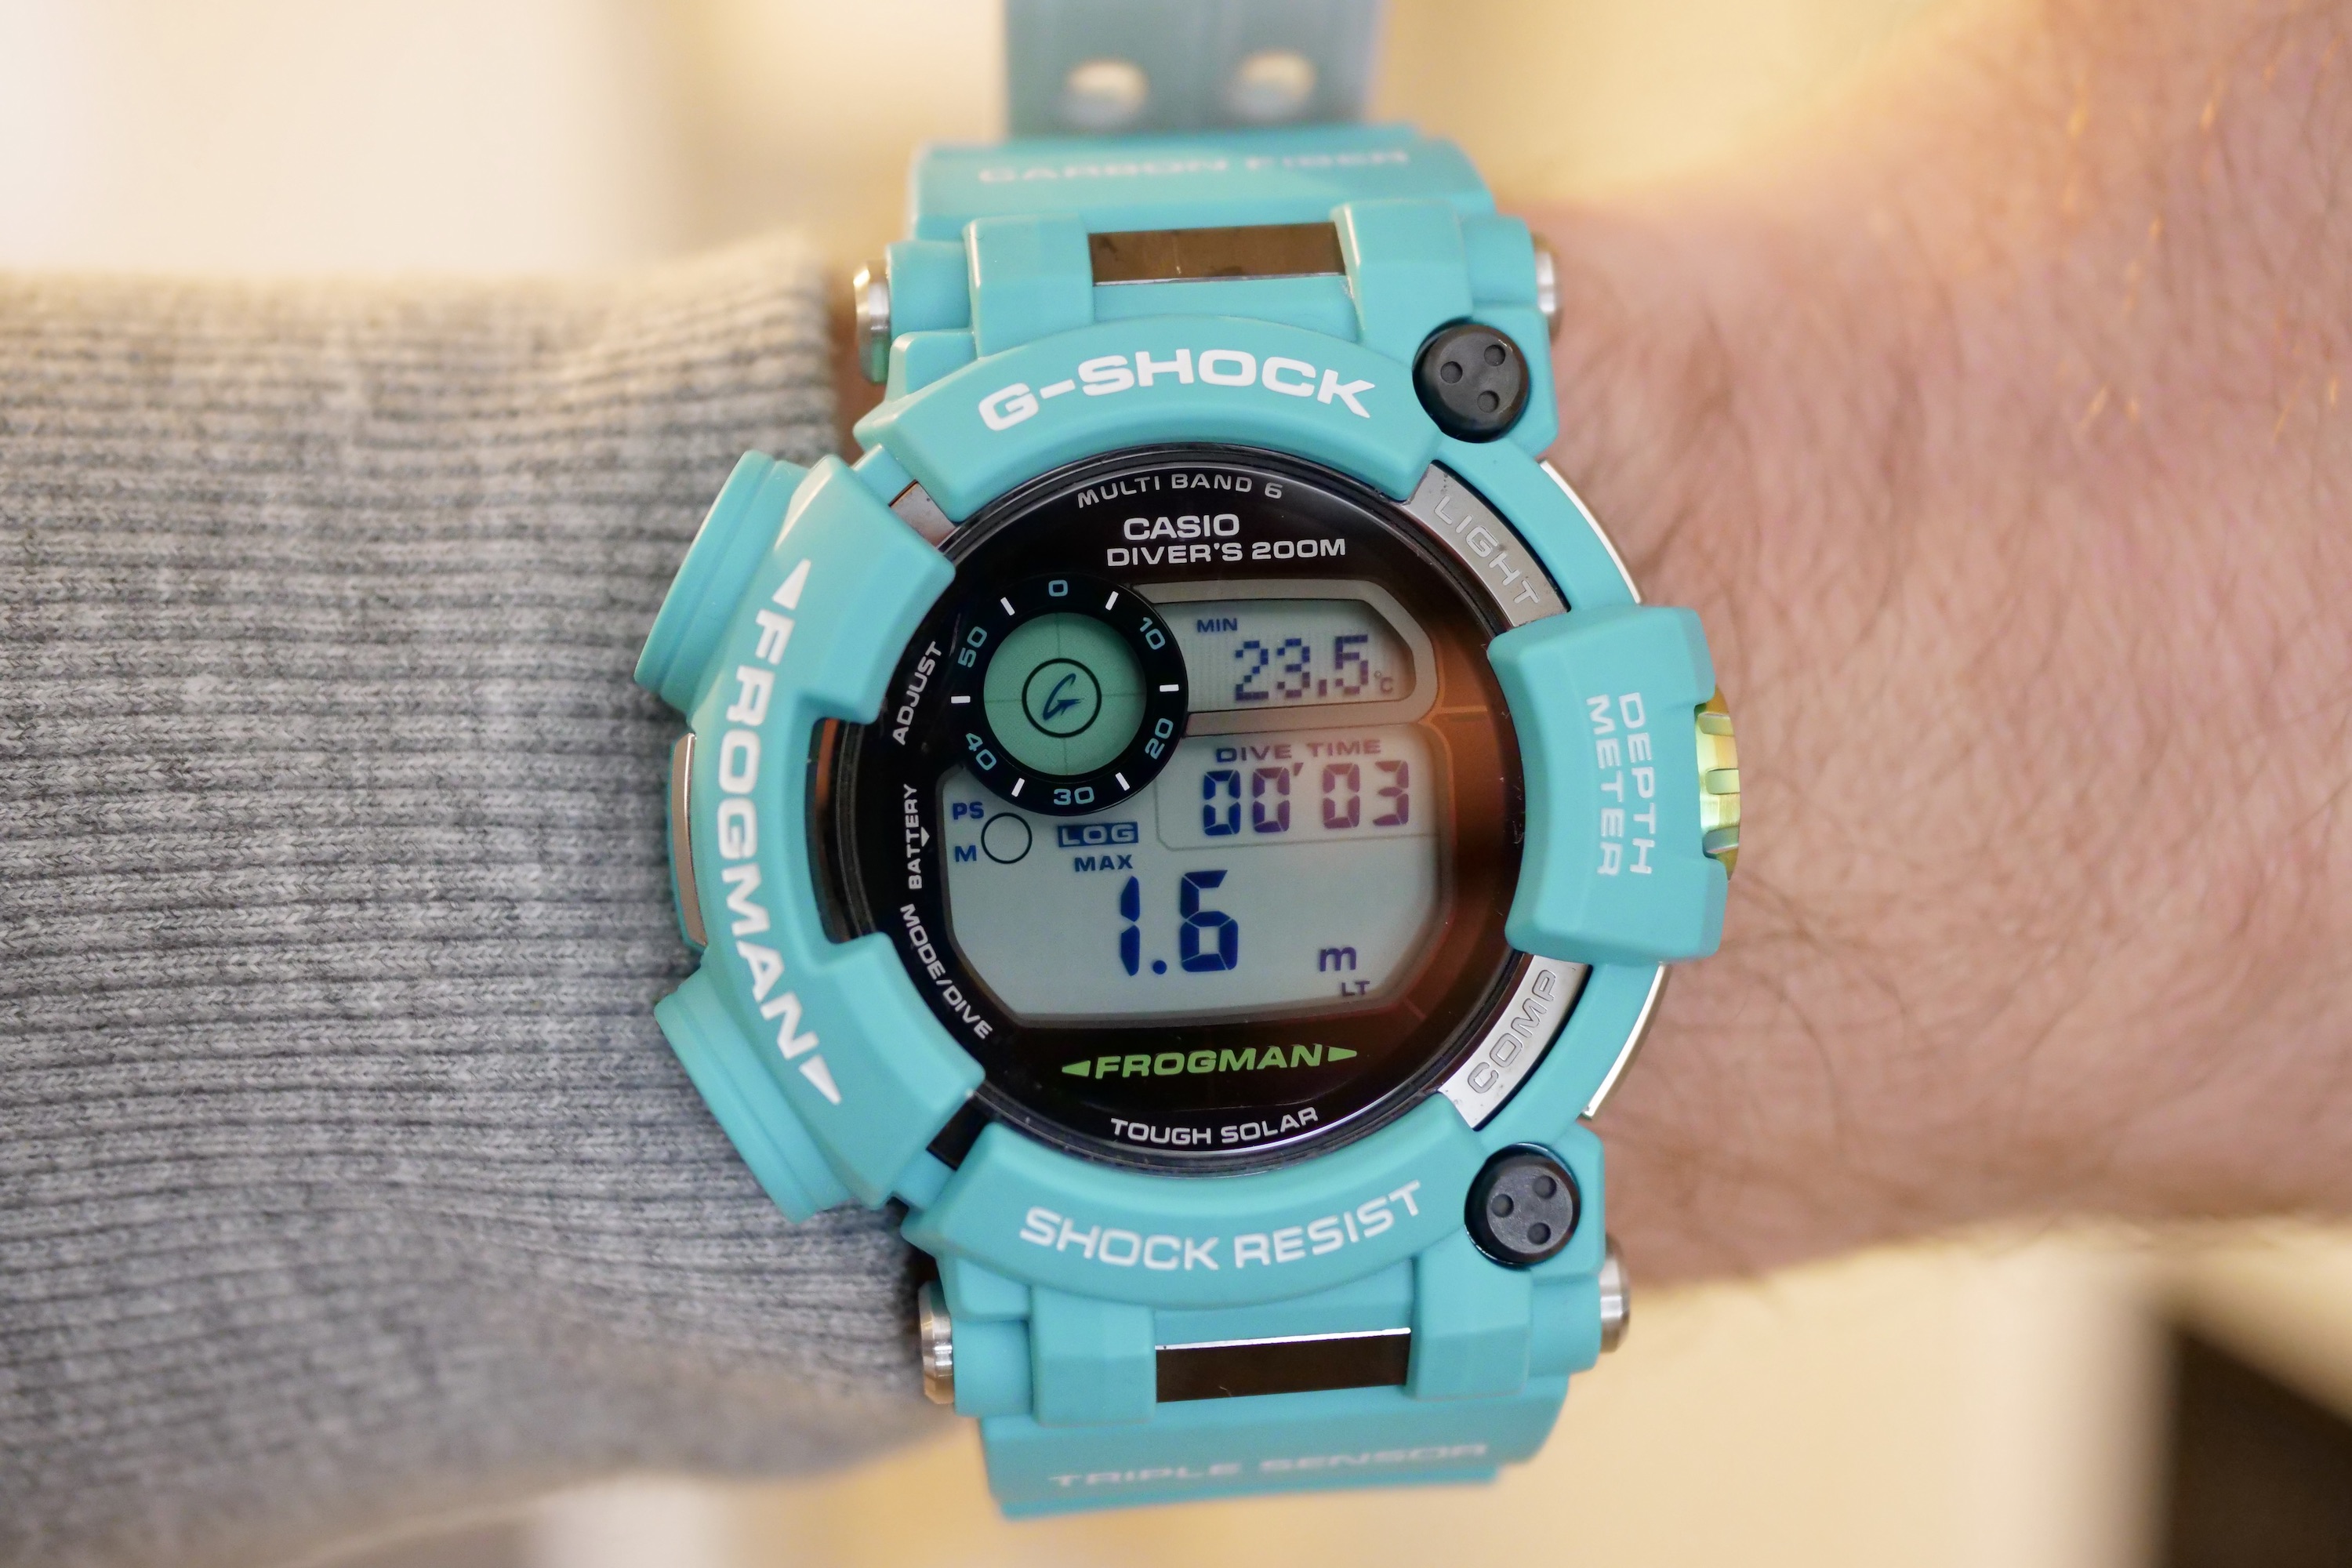 Casio G-Shock GWF-D1000 Frogman showing the dive log.